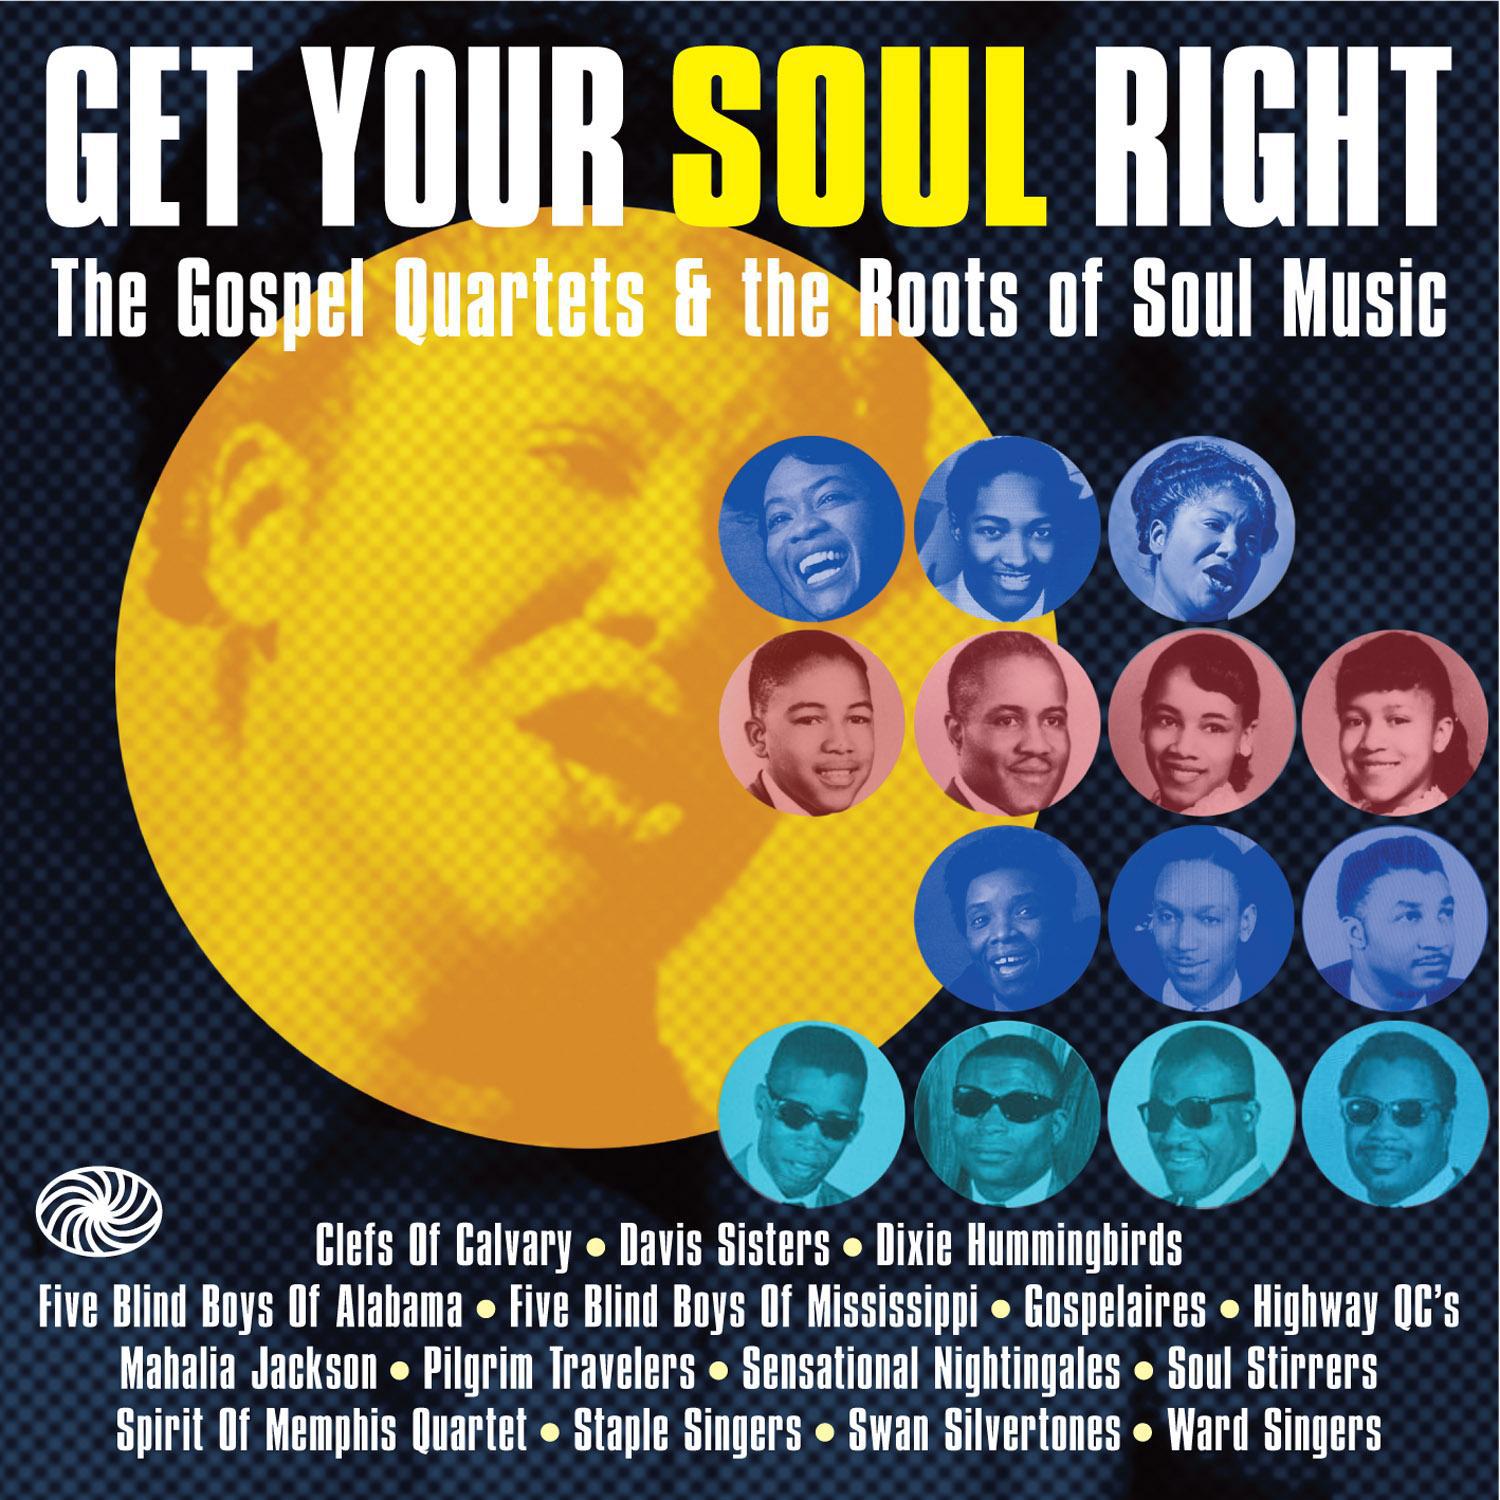 Get Your Soul Right: The Gospel Quartets & The Roots of Soul Music